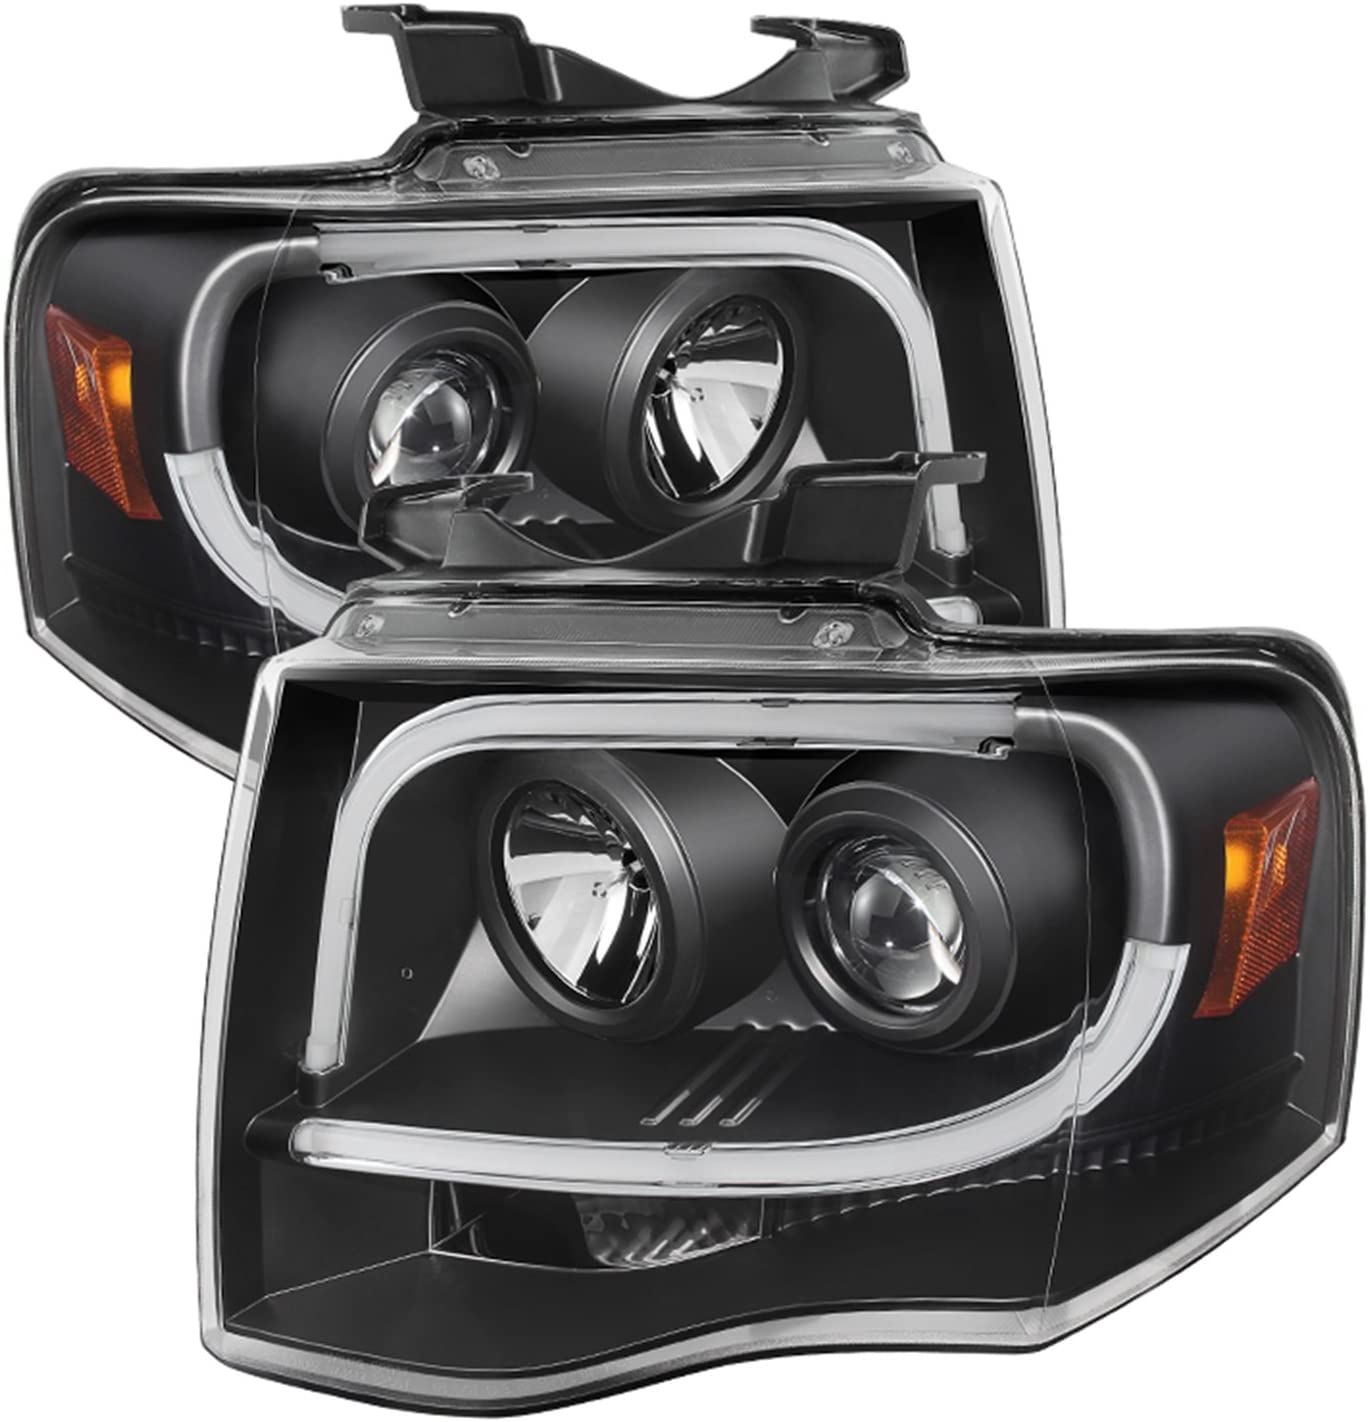 Spyder 5079503 Ford Expedition 07-13 Projector Headlights - Light Tube DRL - Black - High H1 (Included) - Low H1 (Included)